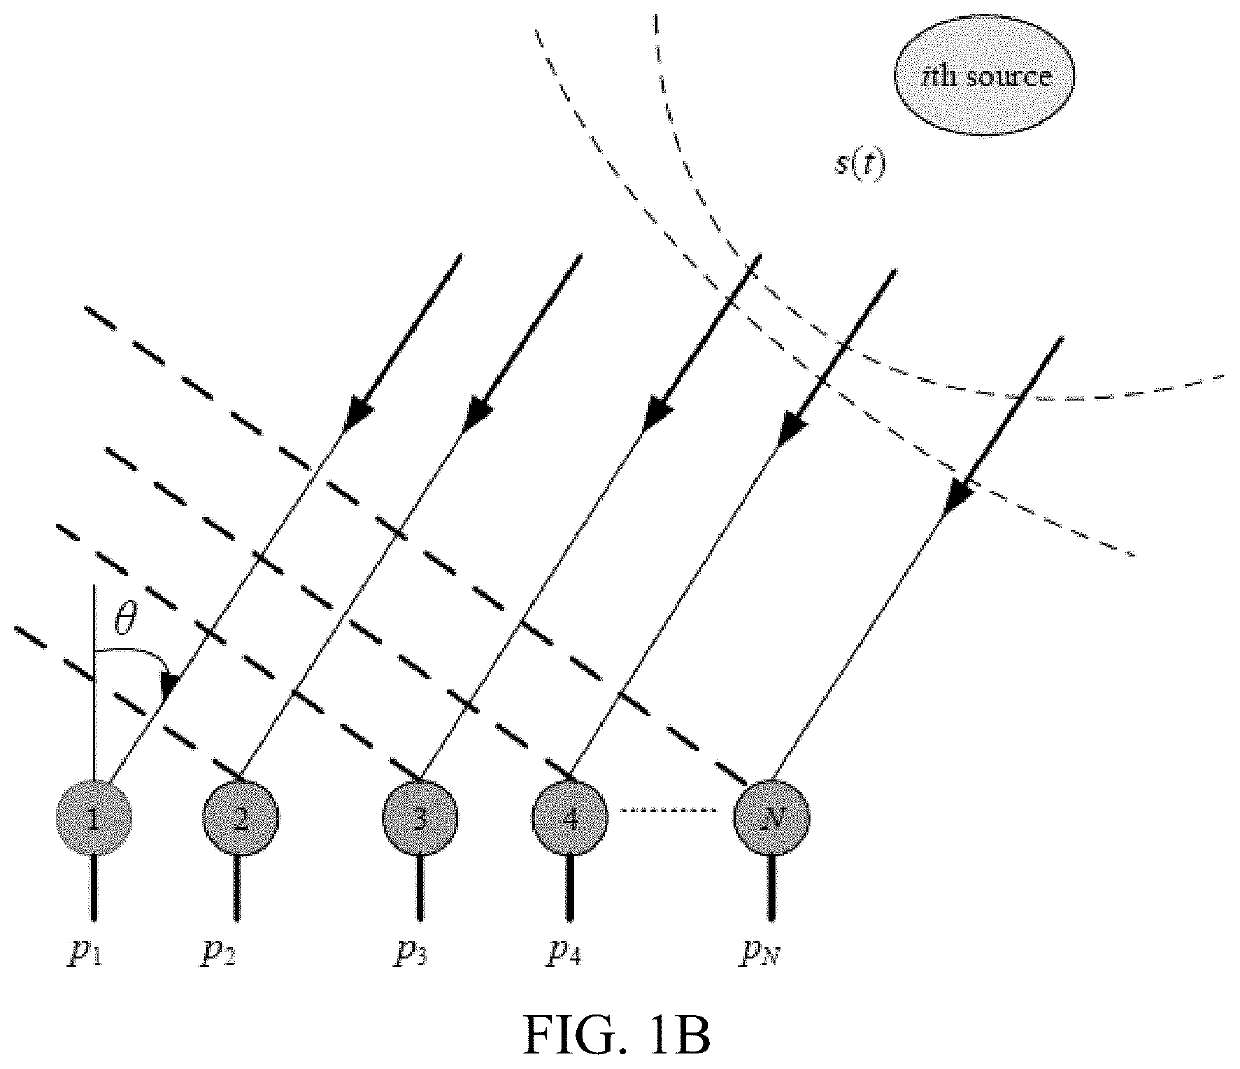 Signal emitter location determination using sparse doa estimation based on a multi-level prime array with compressed subarray